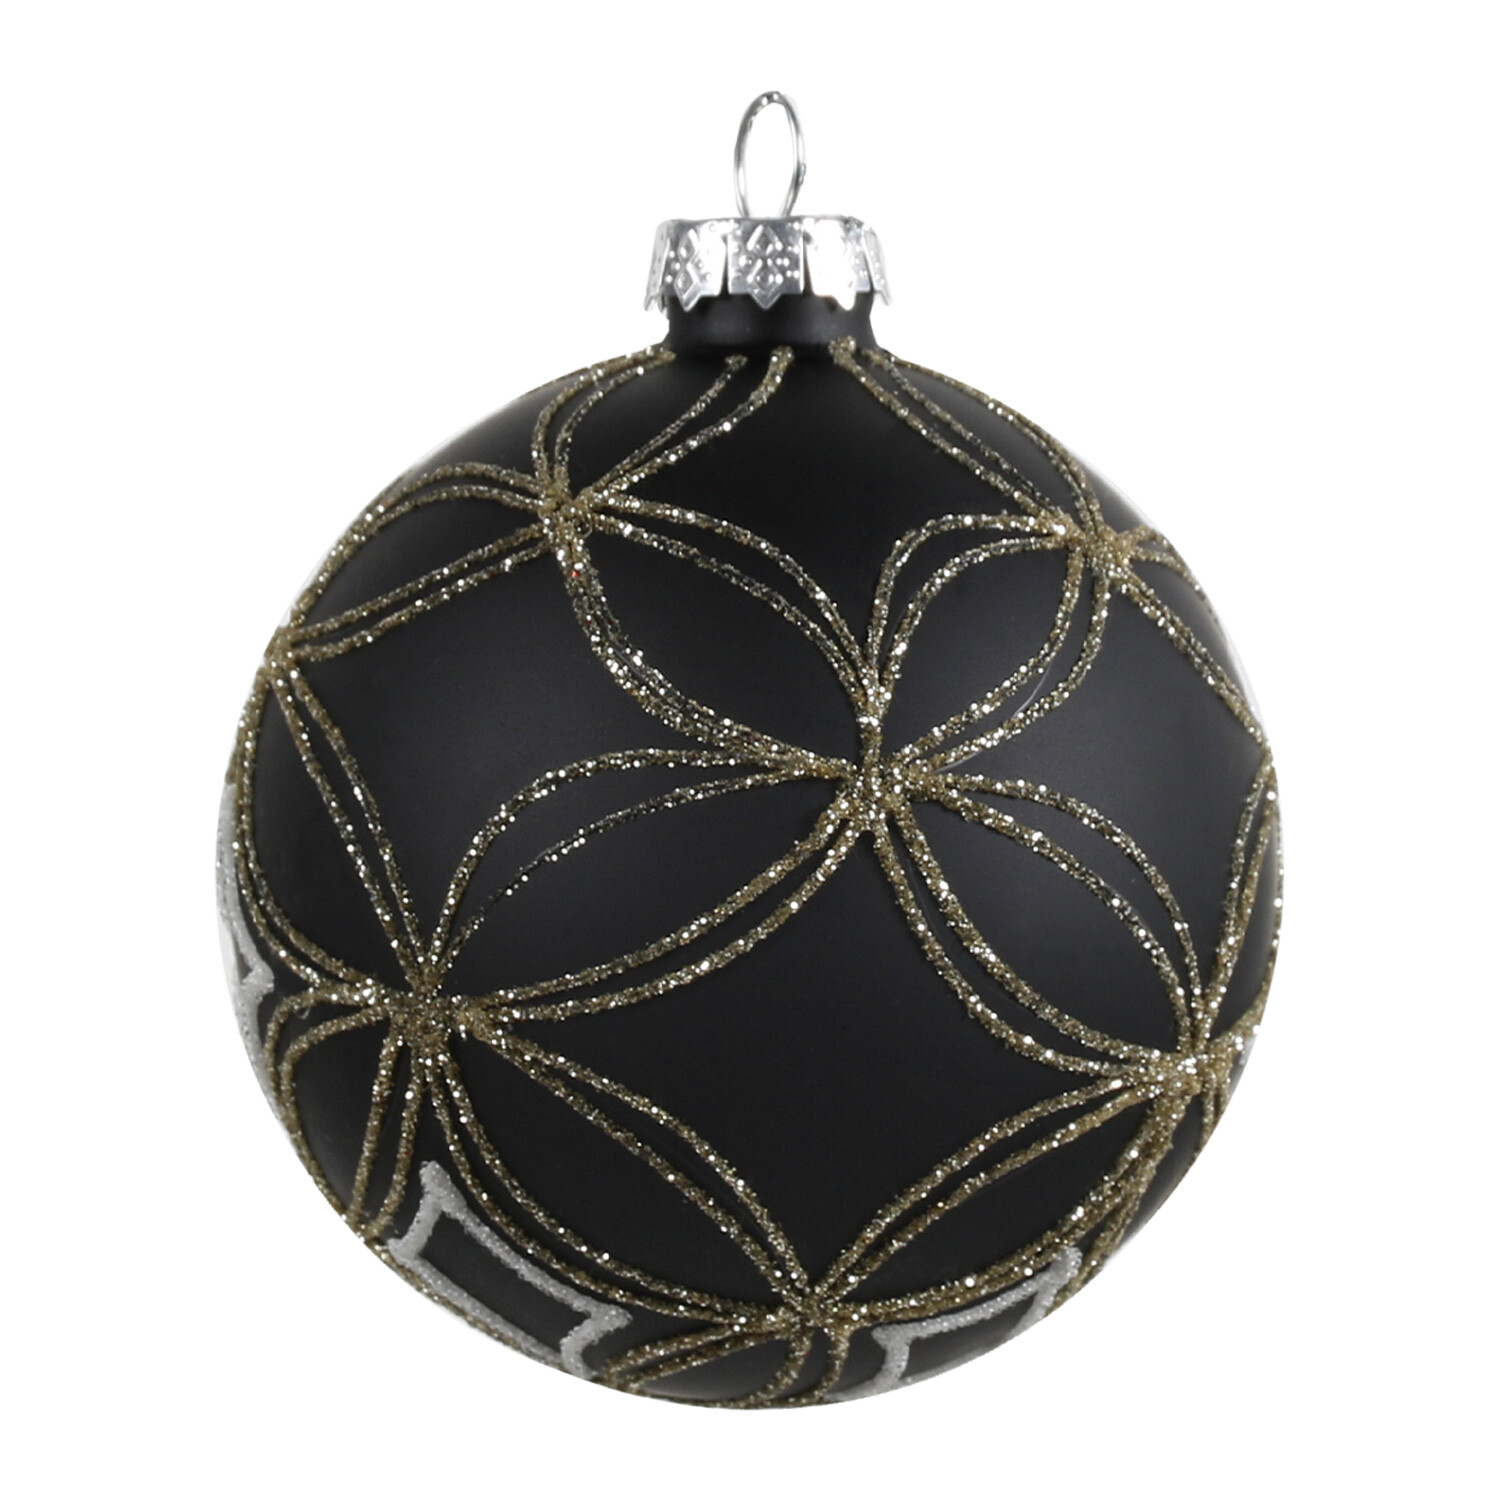 Single Chic Noir Black Beaded Design Bauble in Assorted Style Image 1